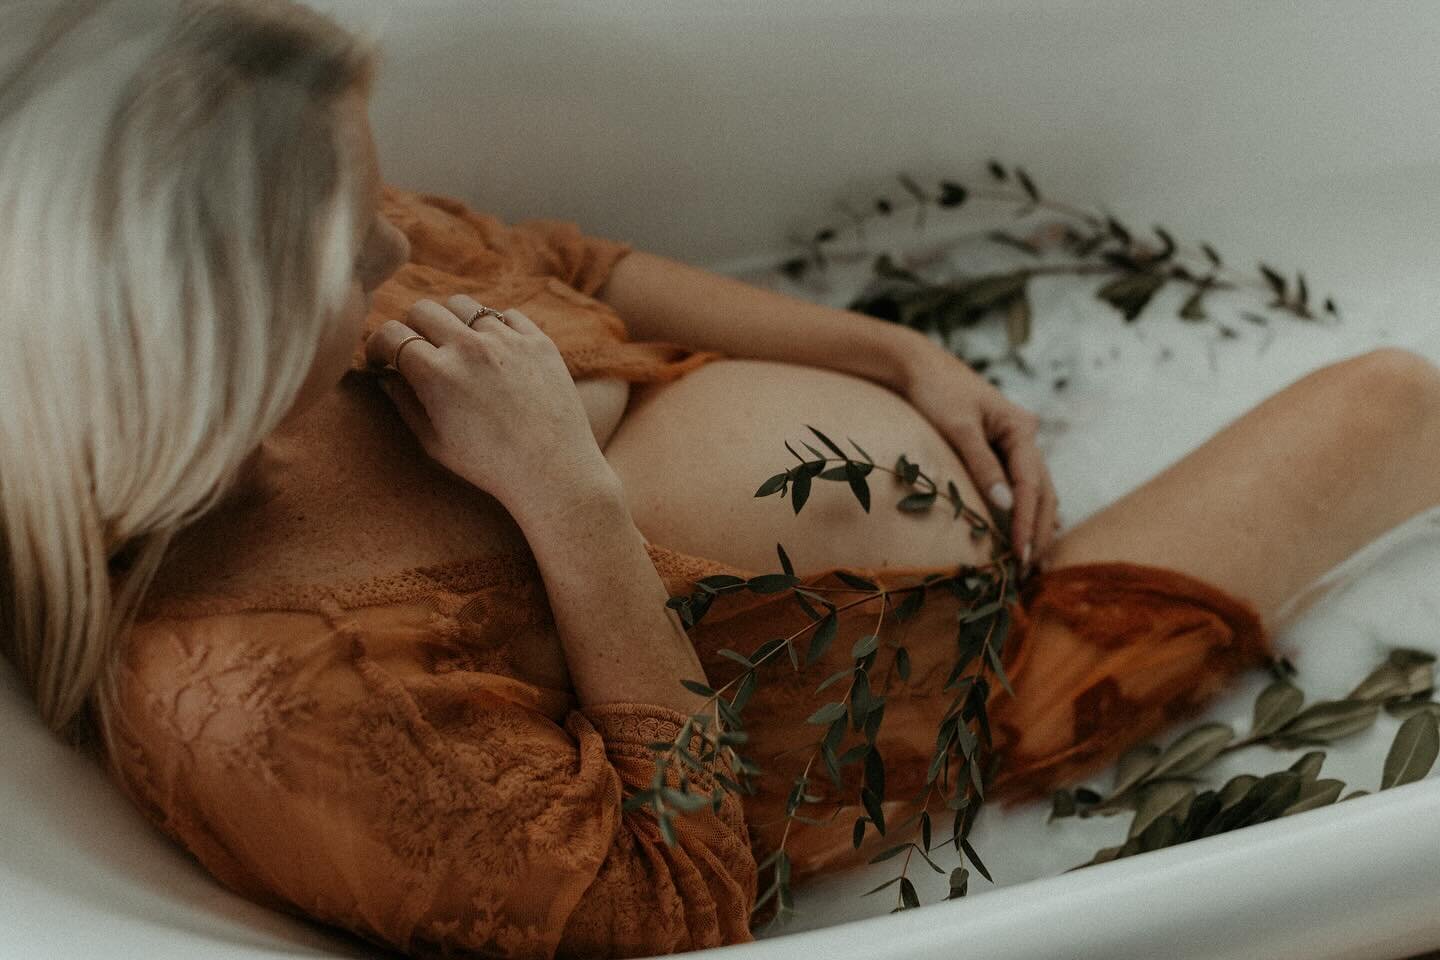 Your pregnancy is worth celebrating. It&rsquo;s a time of huge transformation and I know it doesn&rsquo;t always feel so beautiful. But you are carrying and nurturing a life. Not everyone gets to experience this. The unglamorous, uncomfortable, and i